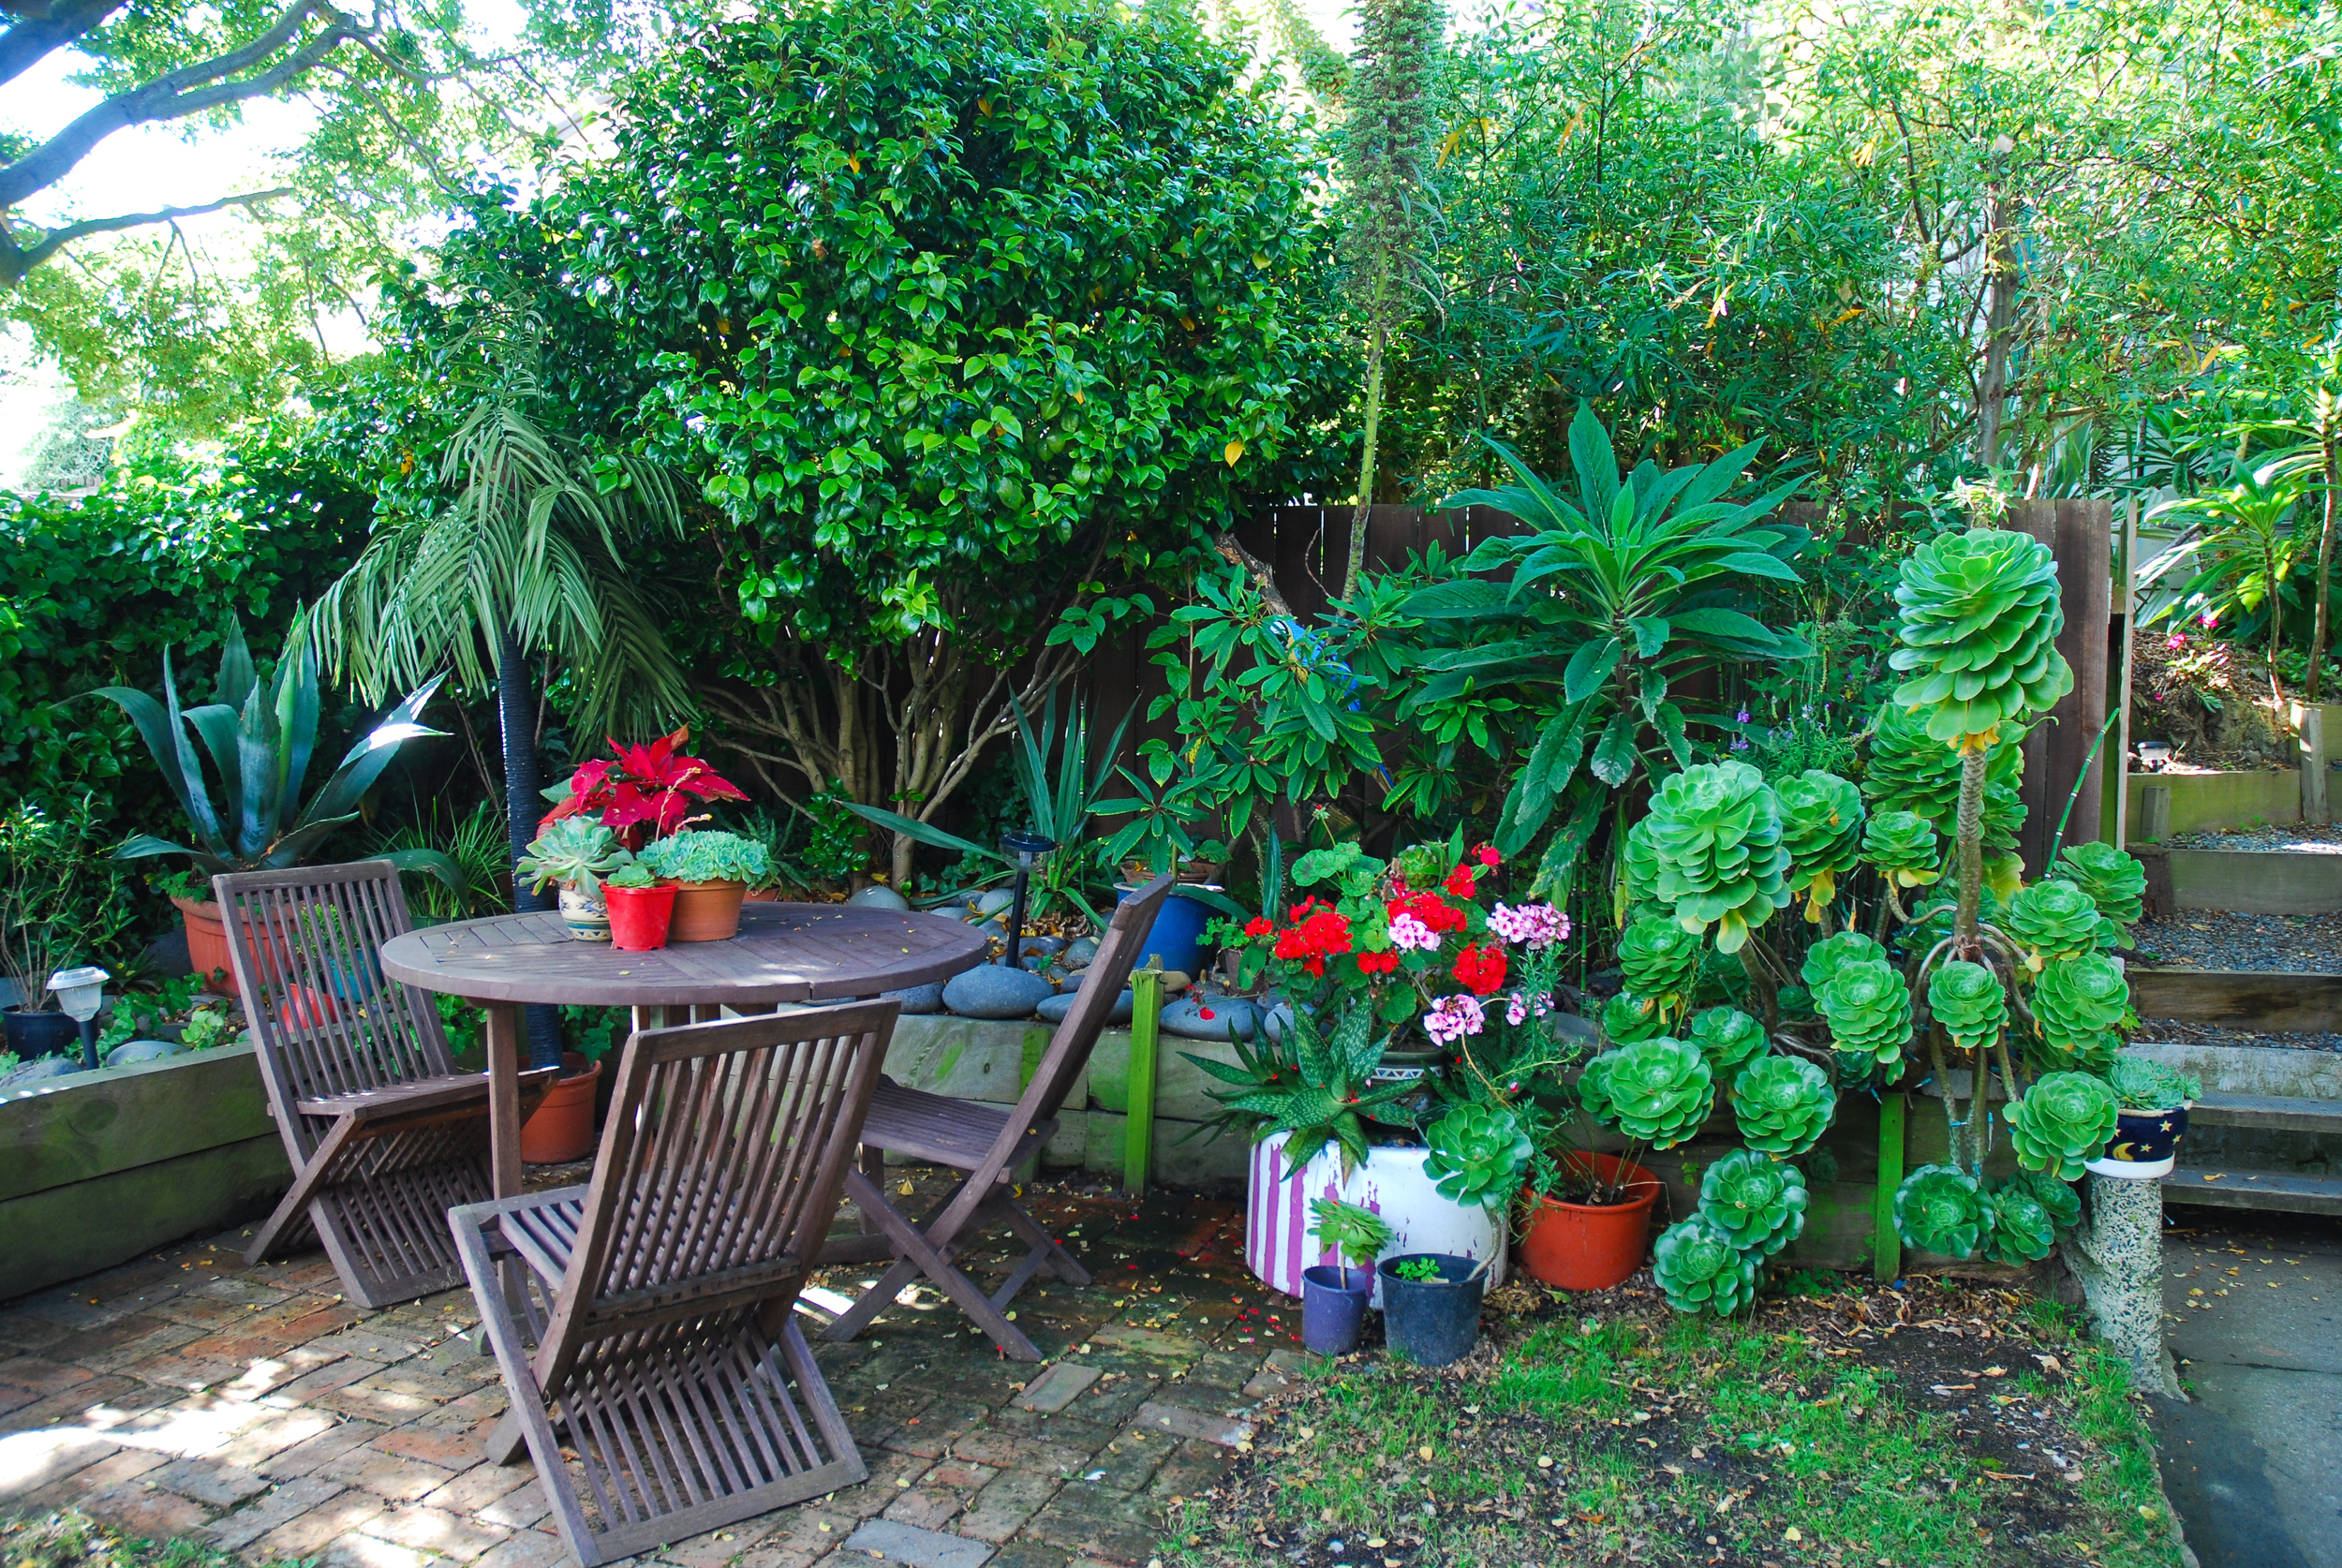 Just one small area of the garden